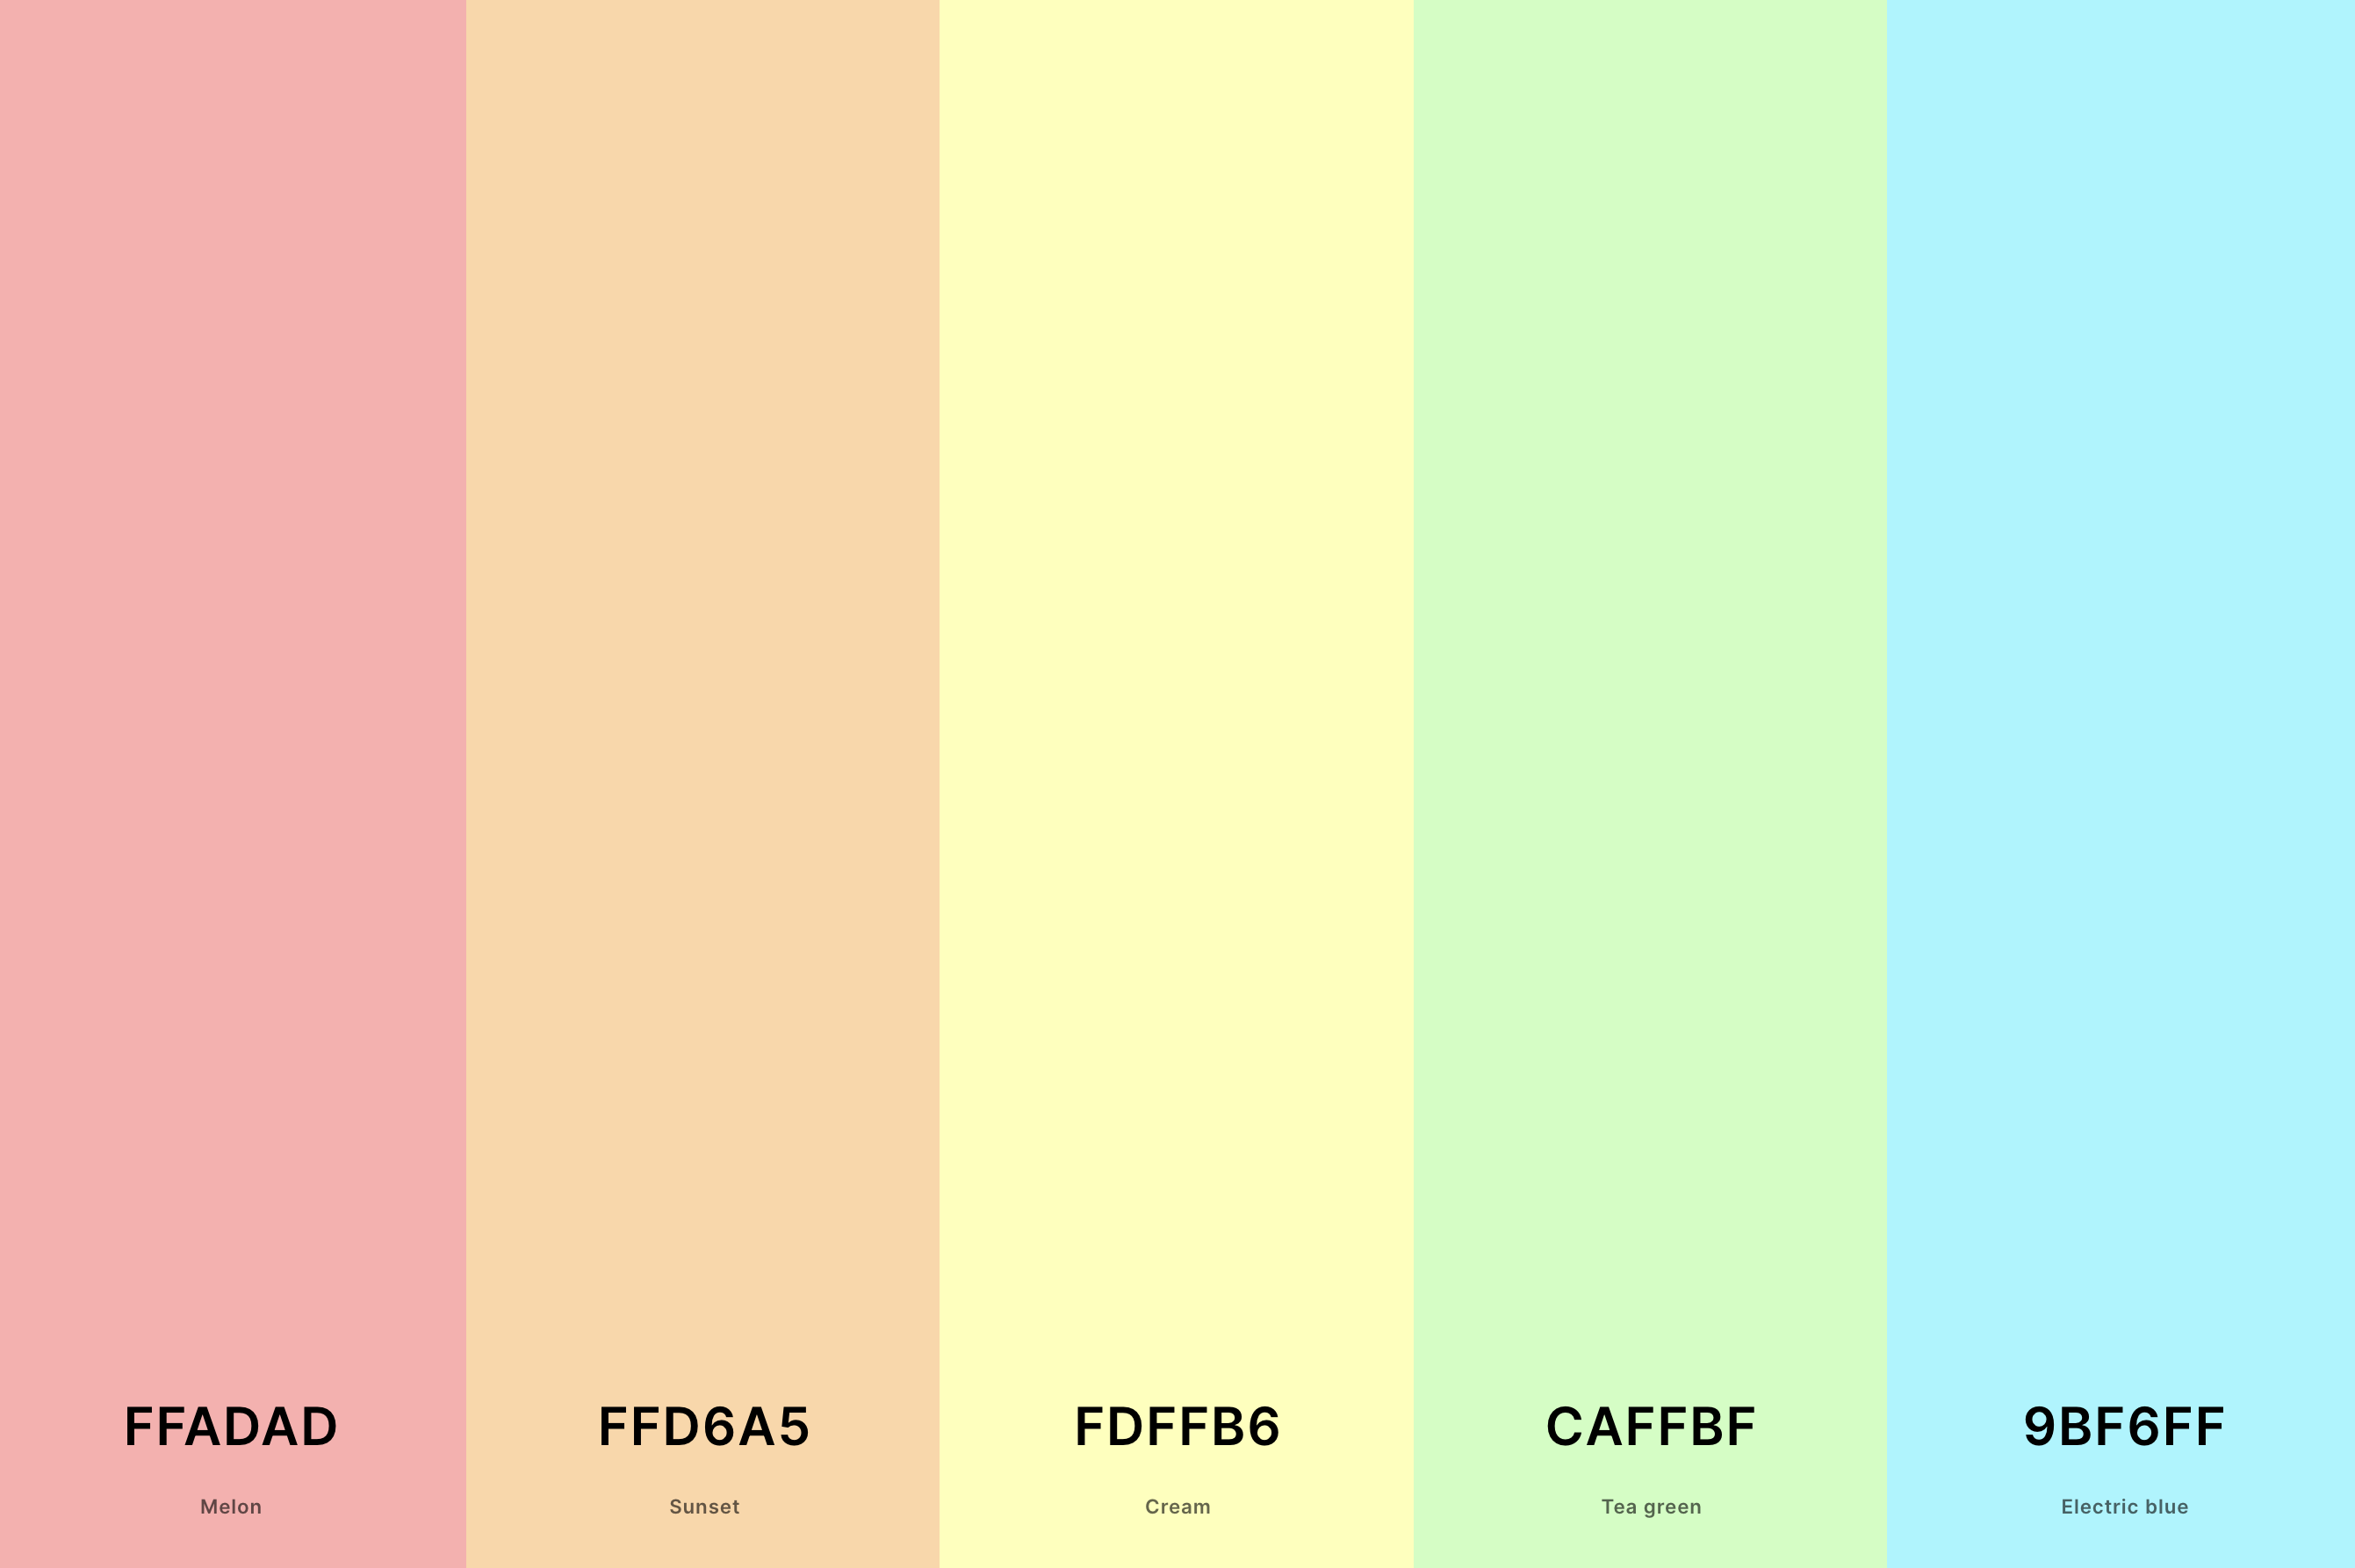 14. Aesthetic Rainbow Color Palette Color Palette with Melon (Hex #FFADAD) + Sunset (Hex #FFD6A5) + Cream (Hex #FDFFB6) + Tea Green (Hex #CAFFBF) + Electric Blue (Hex #9BF6FF) Color Palette with Hex Codes